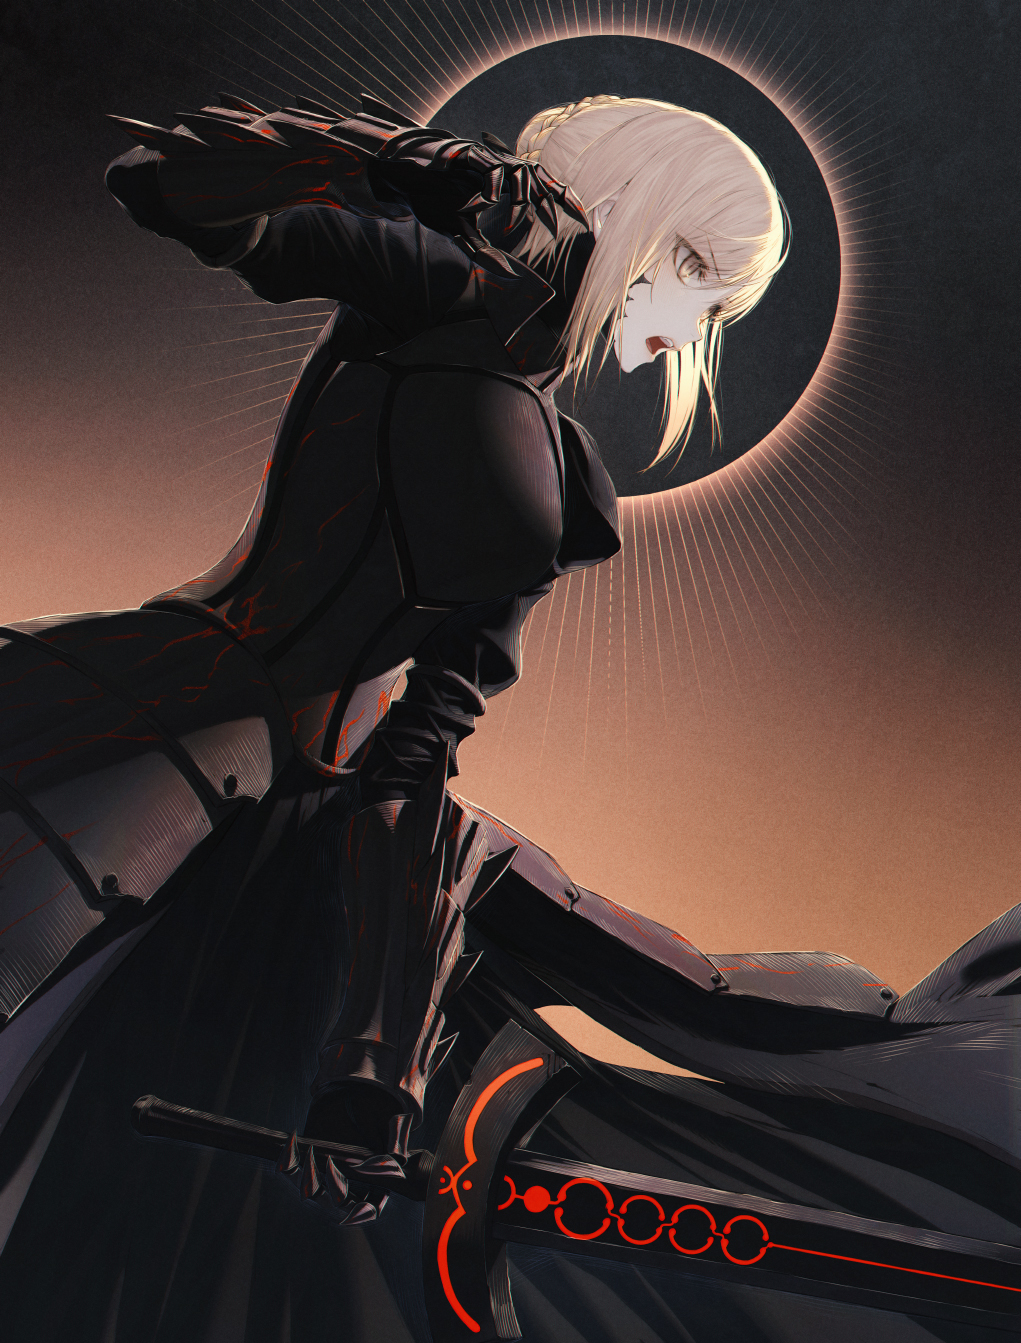 Anime 1021x1343 anime anime girls simple background Fate series Fate/Grand Order Saber Alter sword